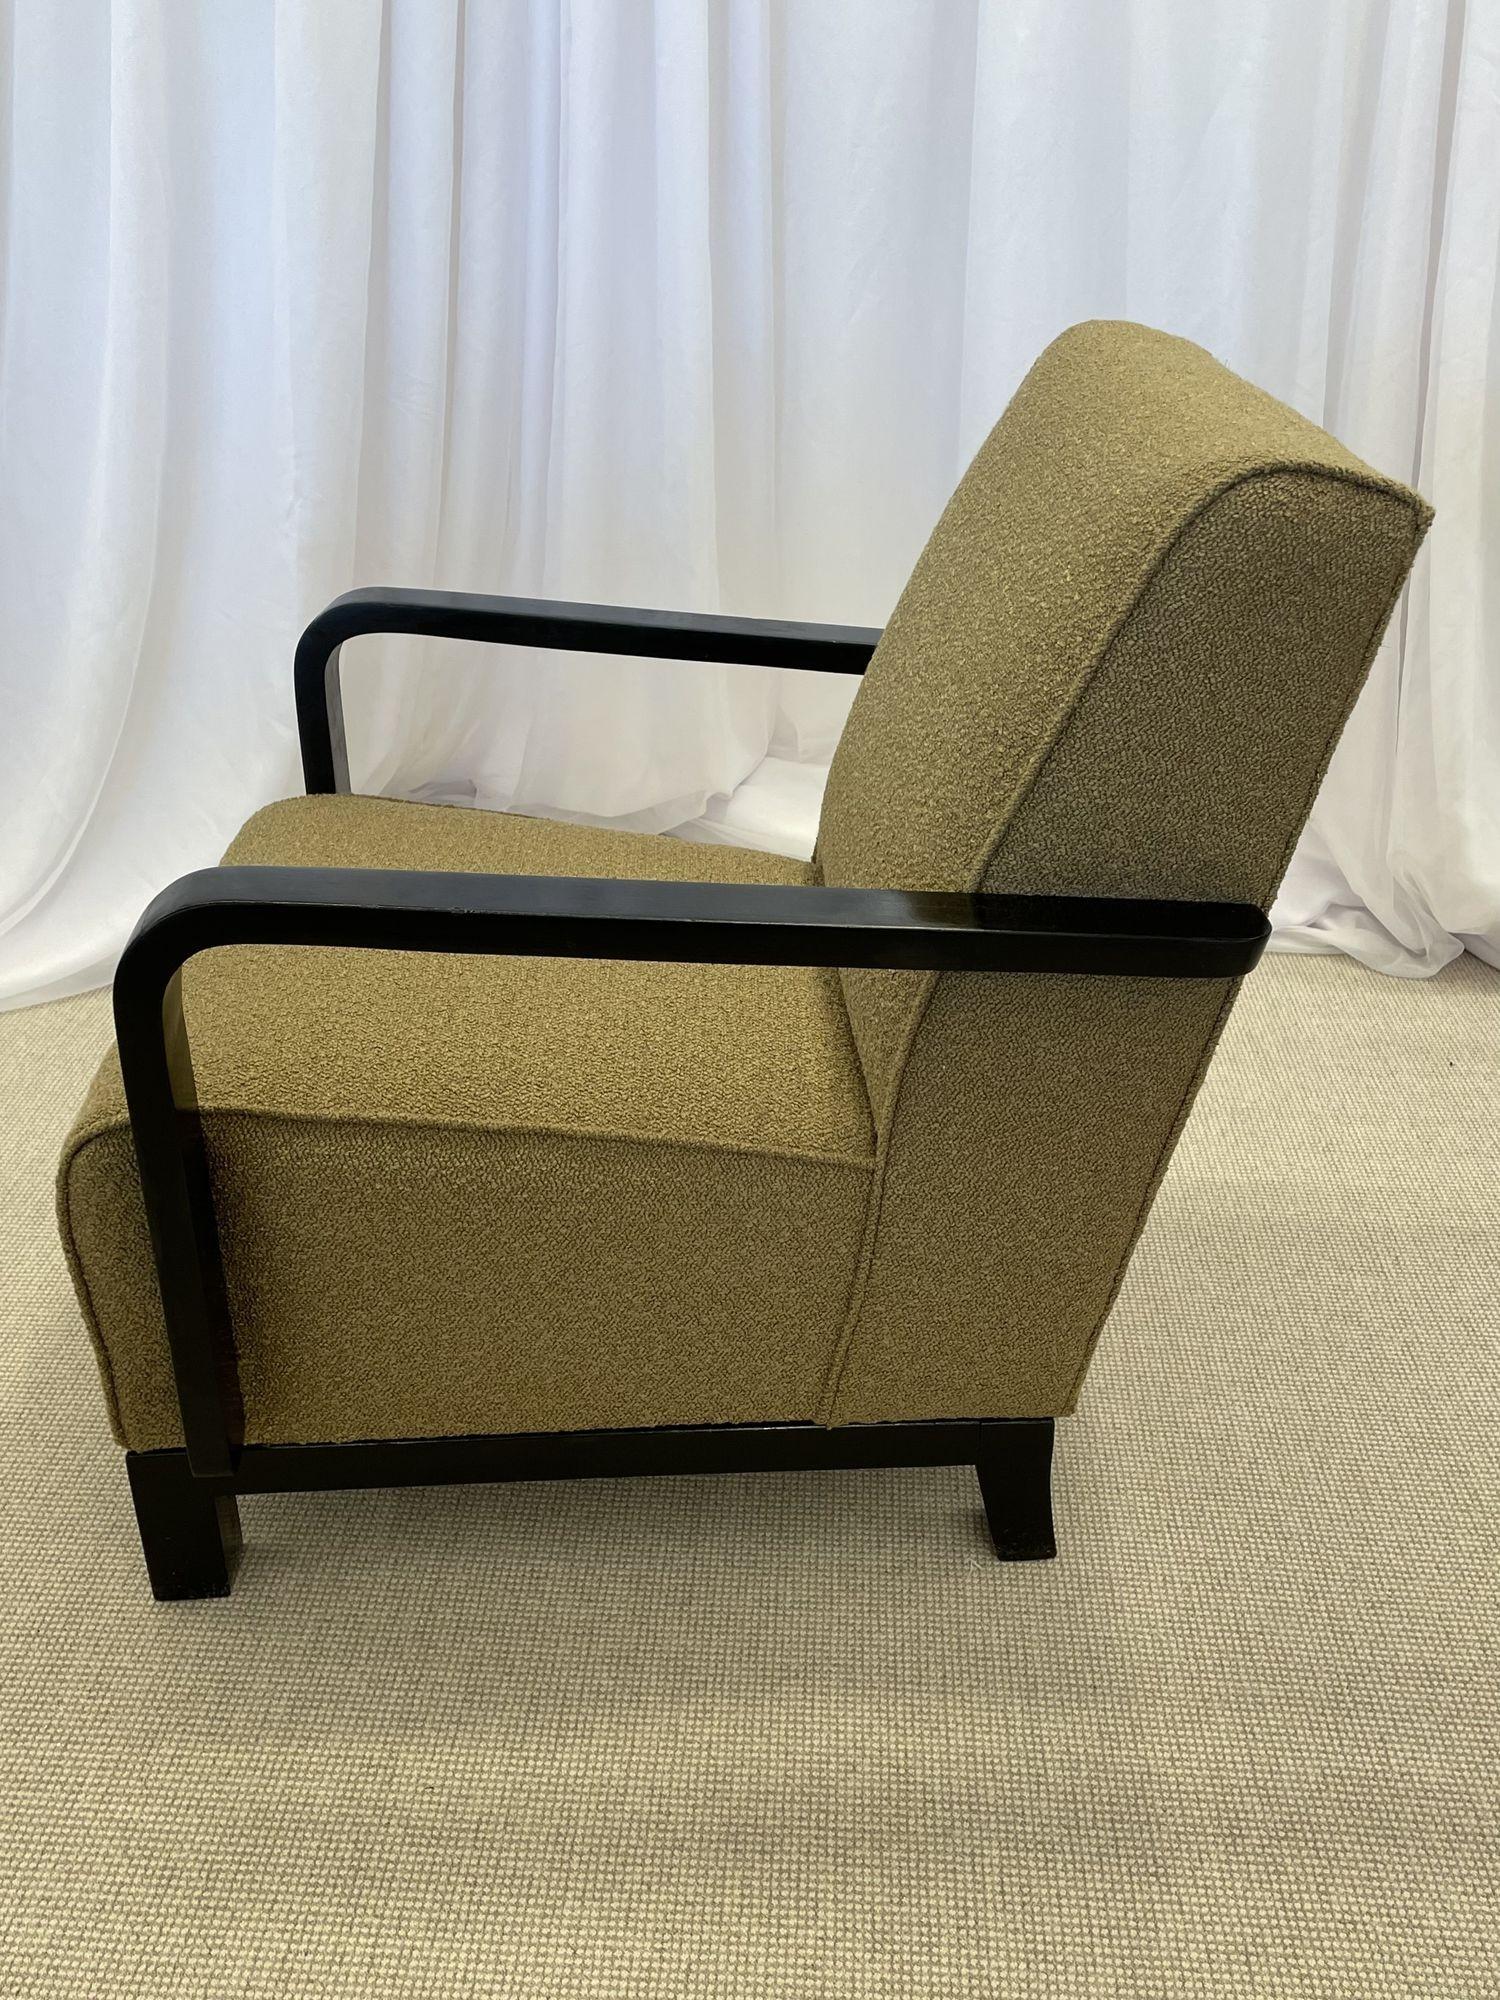 Pair of Vintage Art Deco Lounge / Arm Chairs, Ebony Wood, Boucle, Sweden, 1940s
Pair of chic art deco style lounge or arm chairs newly upholstered in a nubby brown boucle. Each chair is supported by an organic form ebony wood frame. 
 
Ebony Wood,